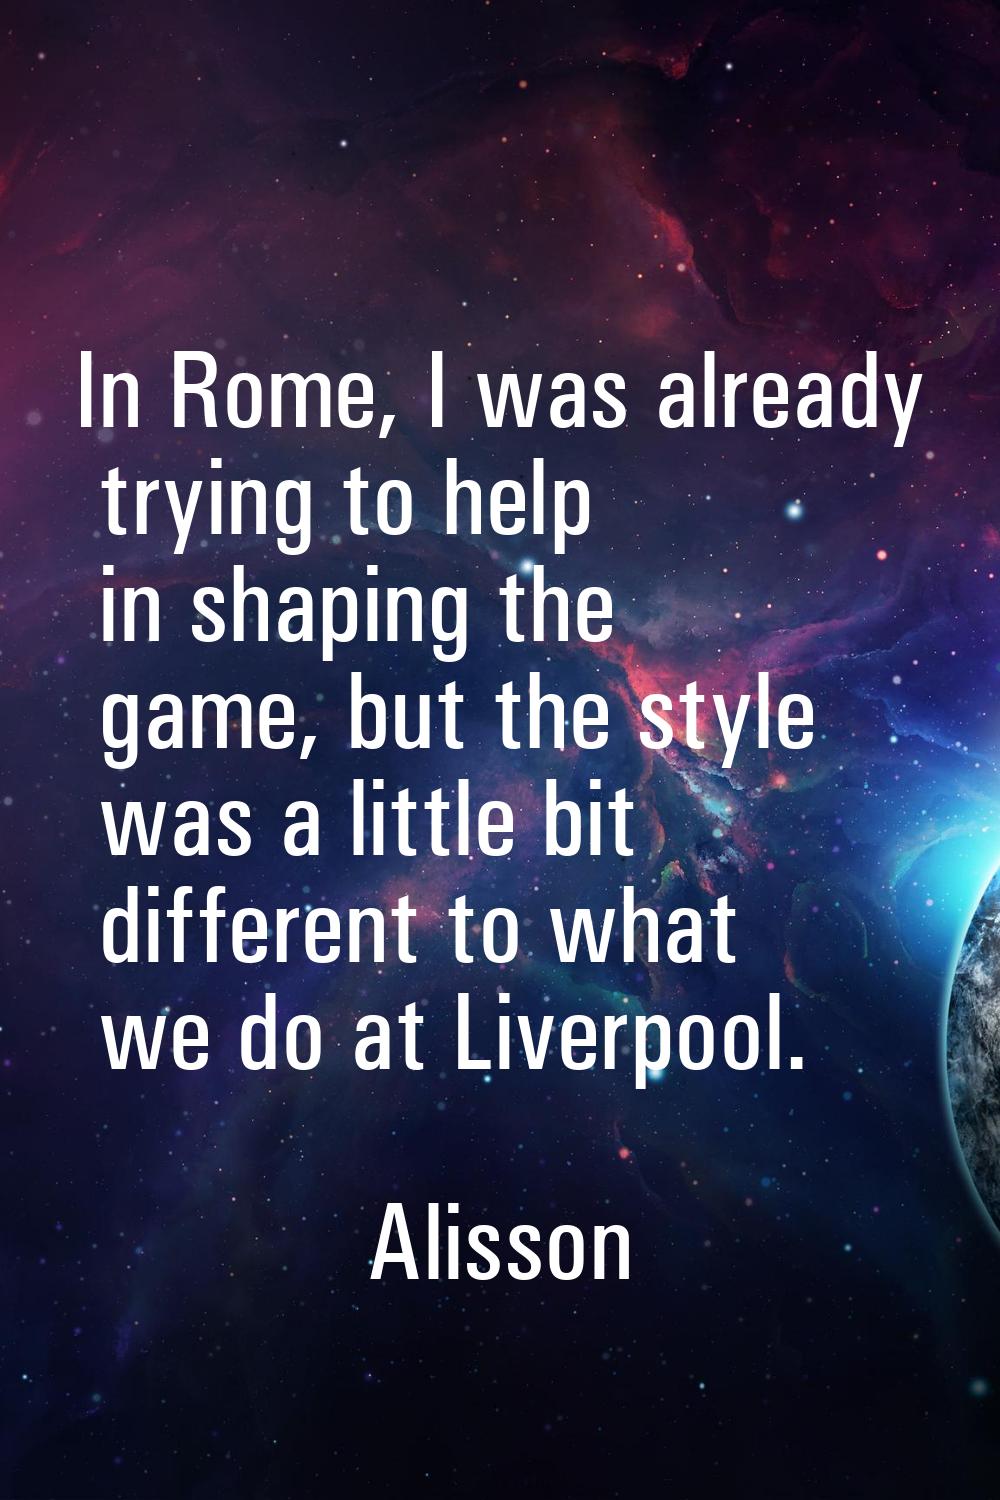 In Rome, I was already trying to help in shaping the game, but the style was a little bit different